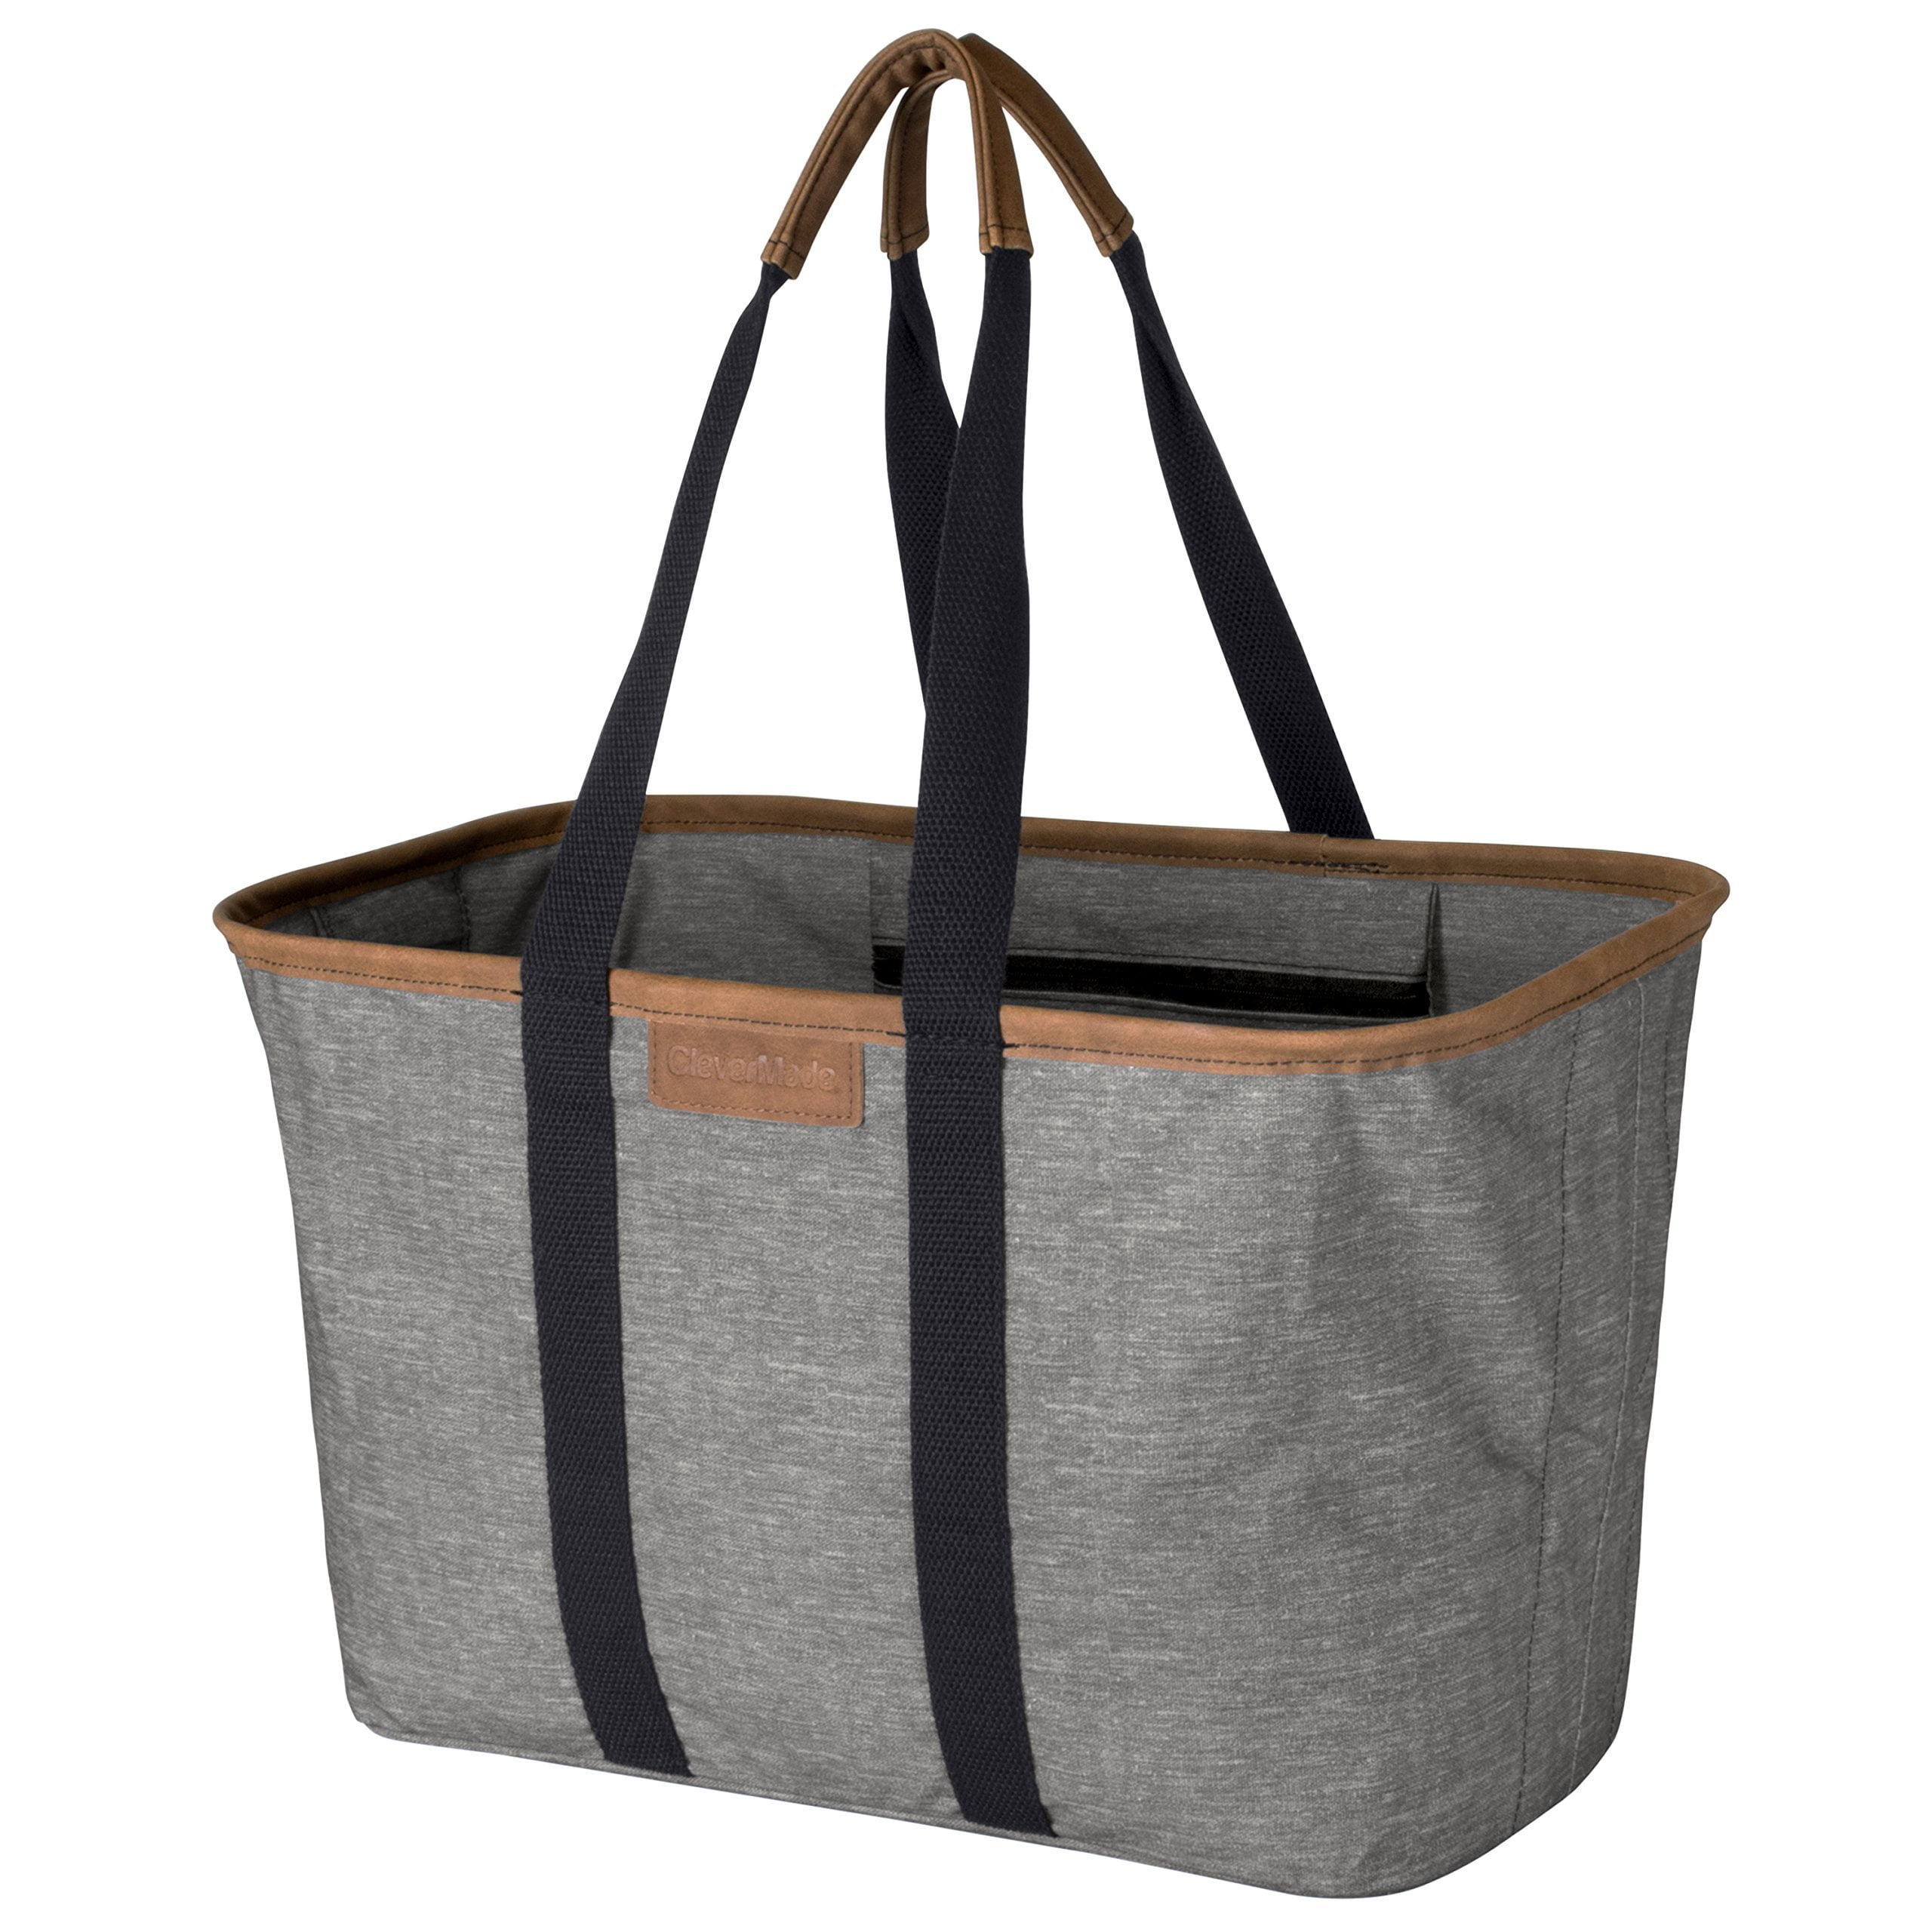 CleverMade 30L SnapBasket LUXE Reusable Collapsible Durable Grocery